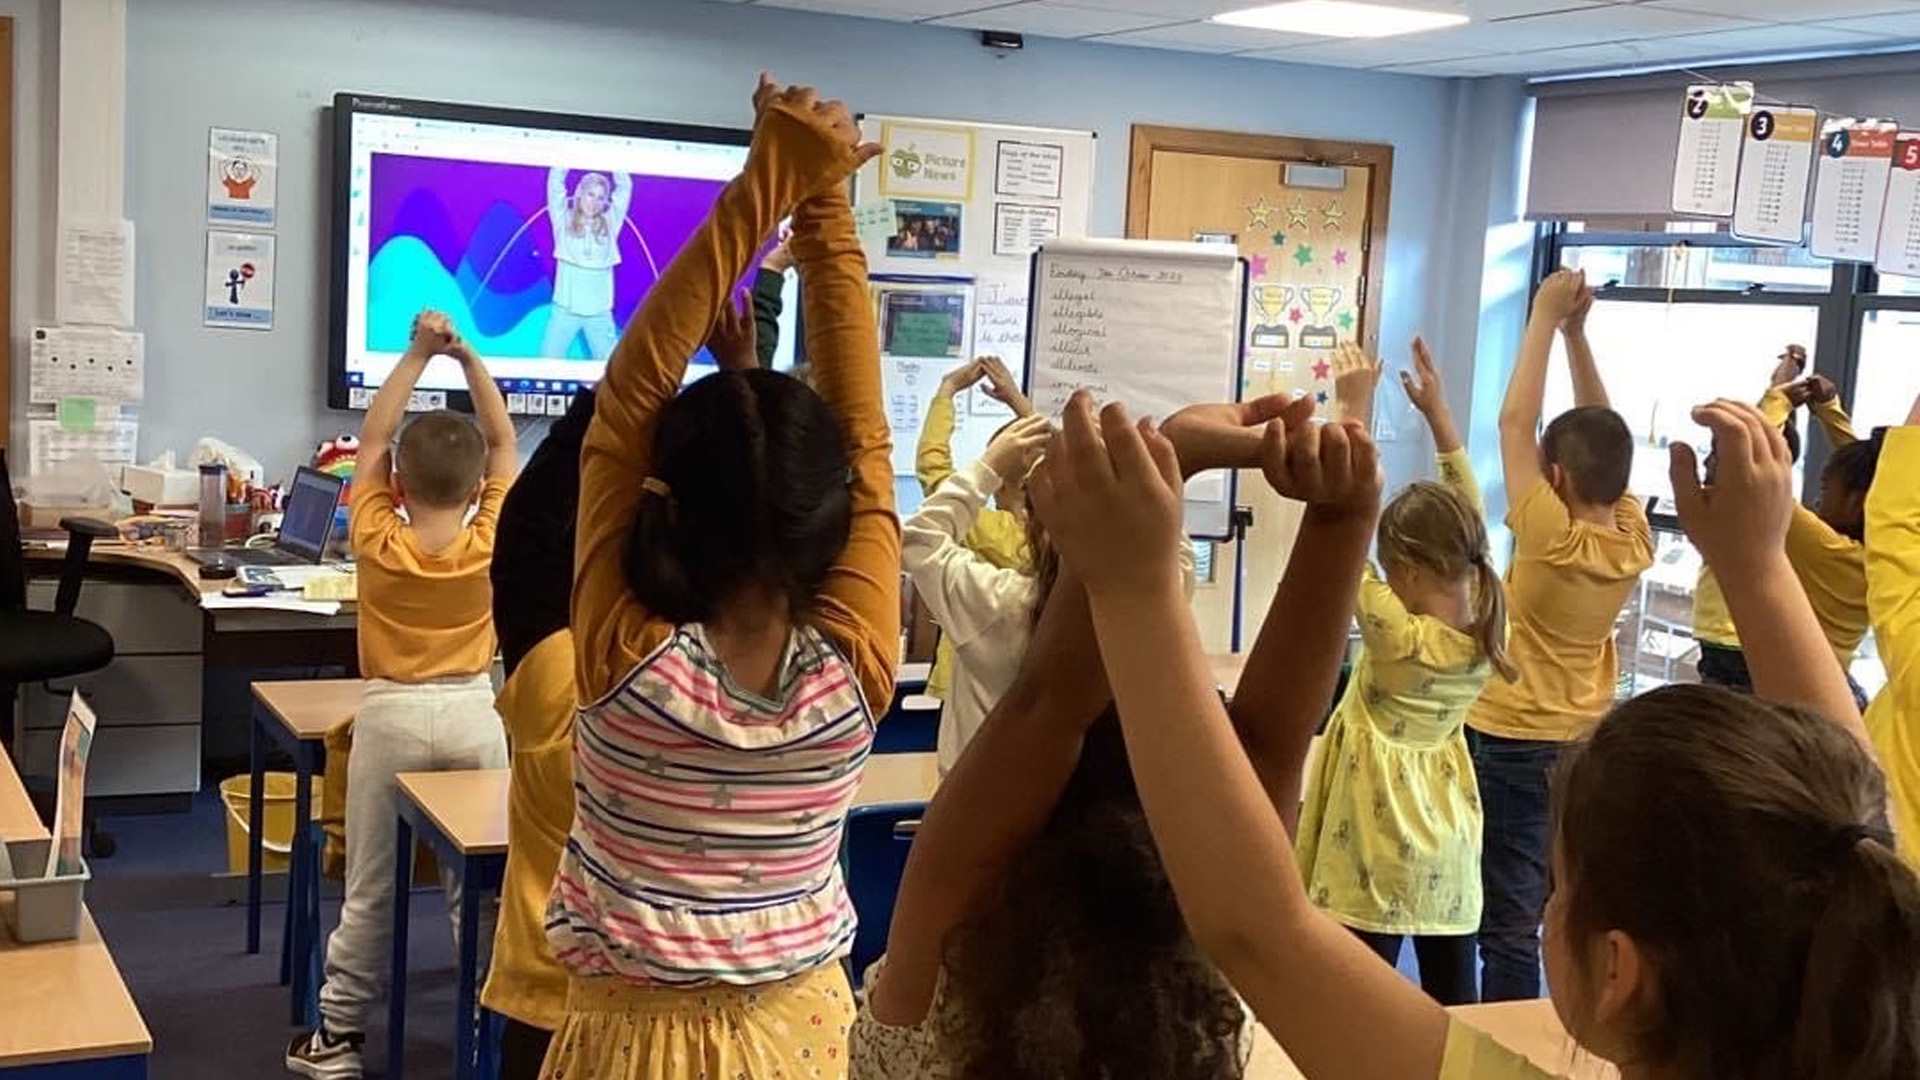 A class of primary school students stretching with their hands in the air all wearing yellow.